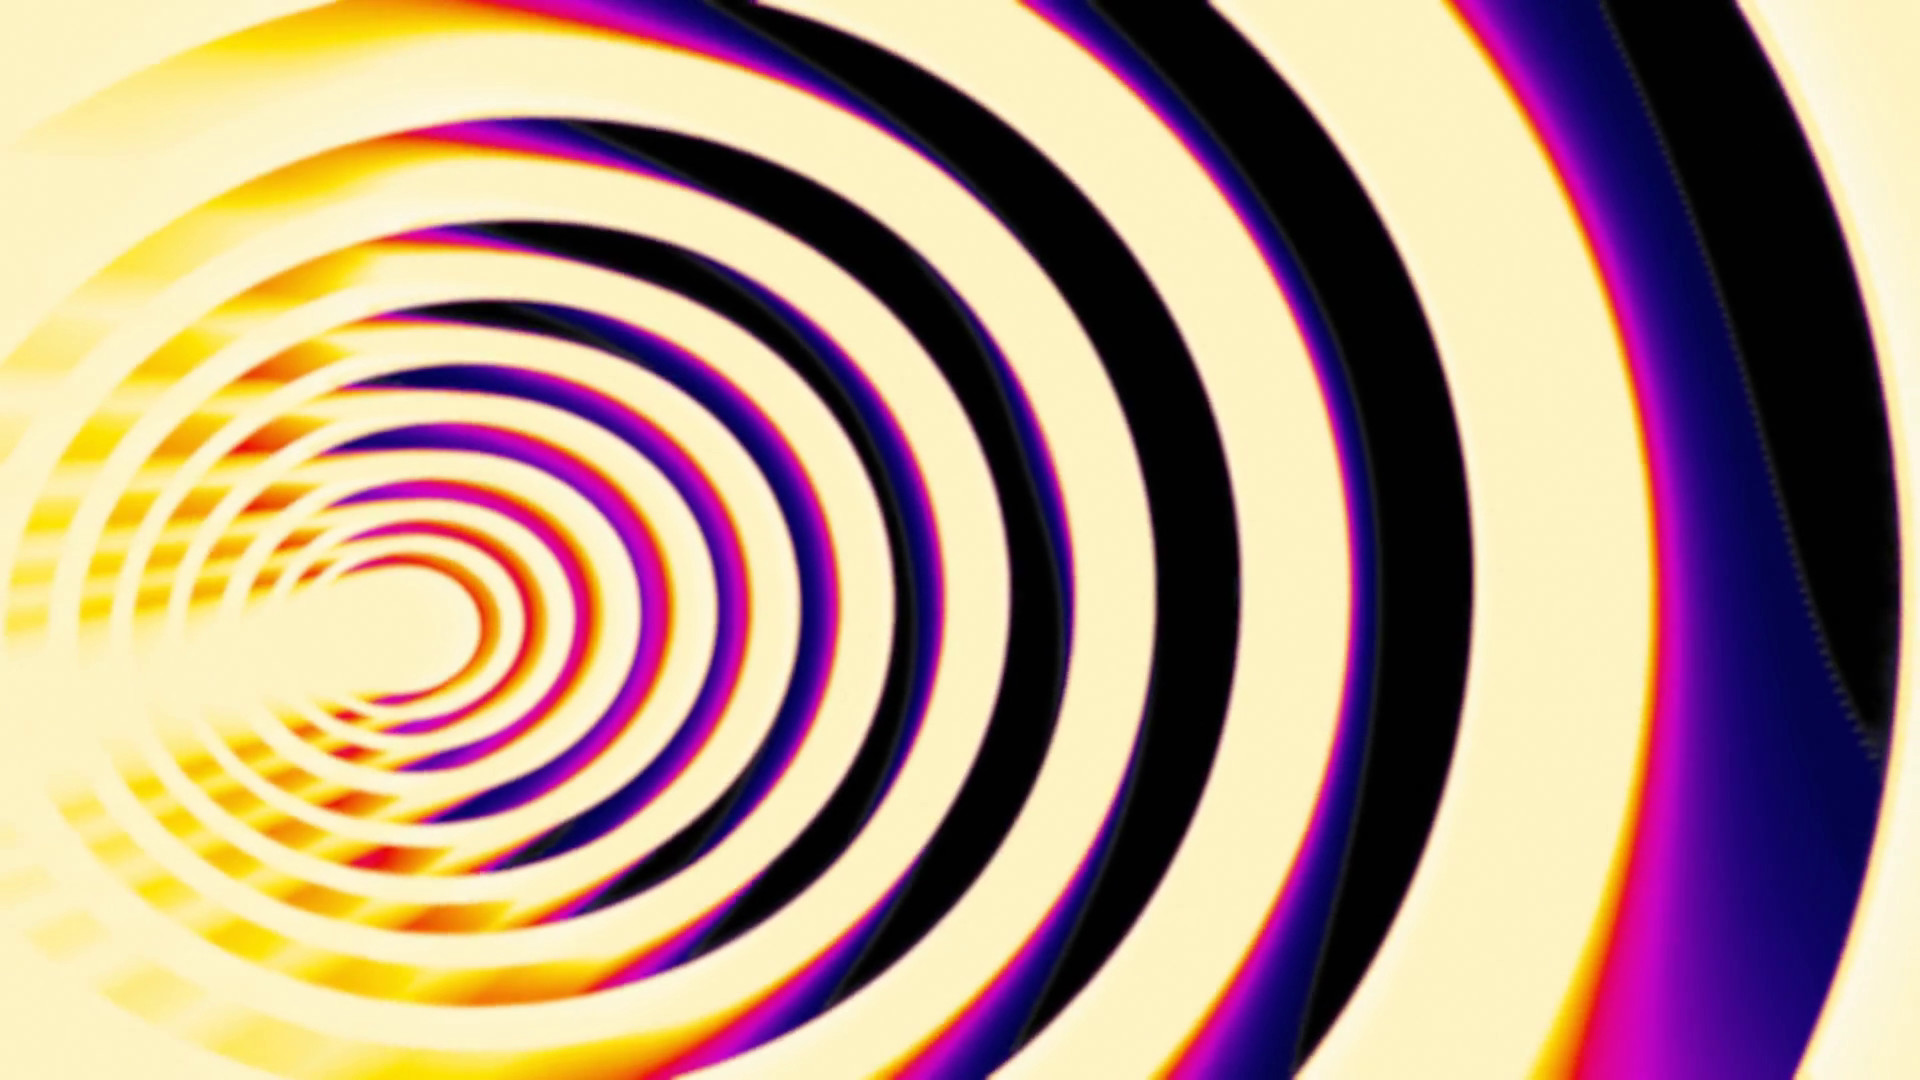 1920x1080 Hypnotic Spiral Eye Thermal. An animated spiral (eye shape), slow rotation.  Hot colors. Seamless loop. Motion Background - VideoBlocks